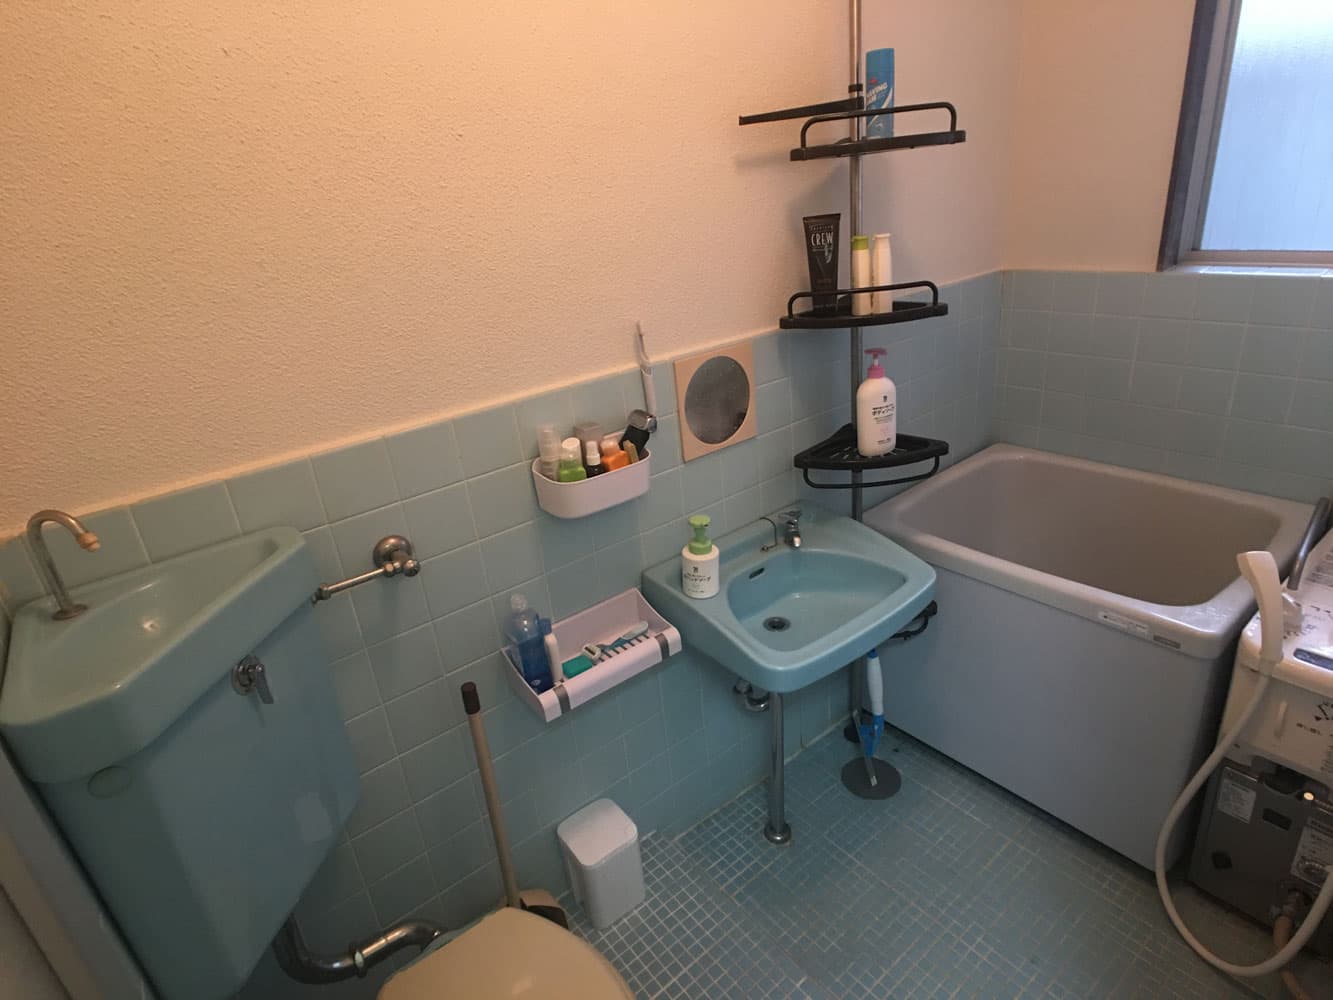 The bathroom in Mitaka House apartments, containing a Japanese-style bath and toilet in the same room.